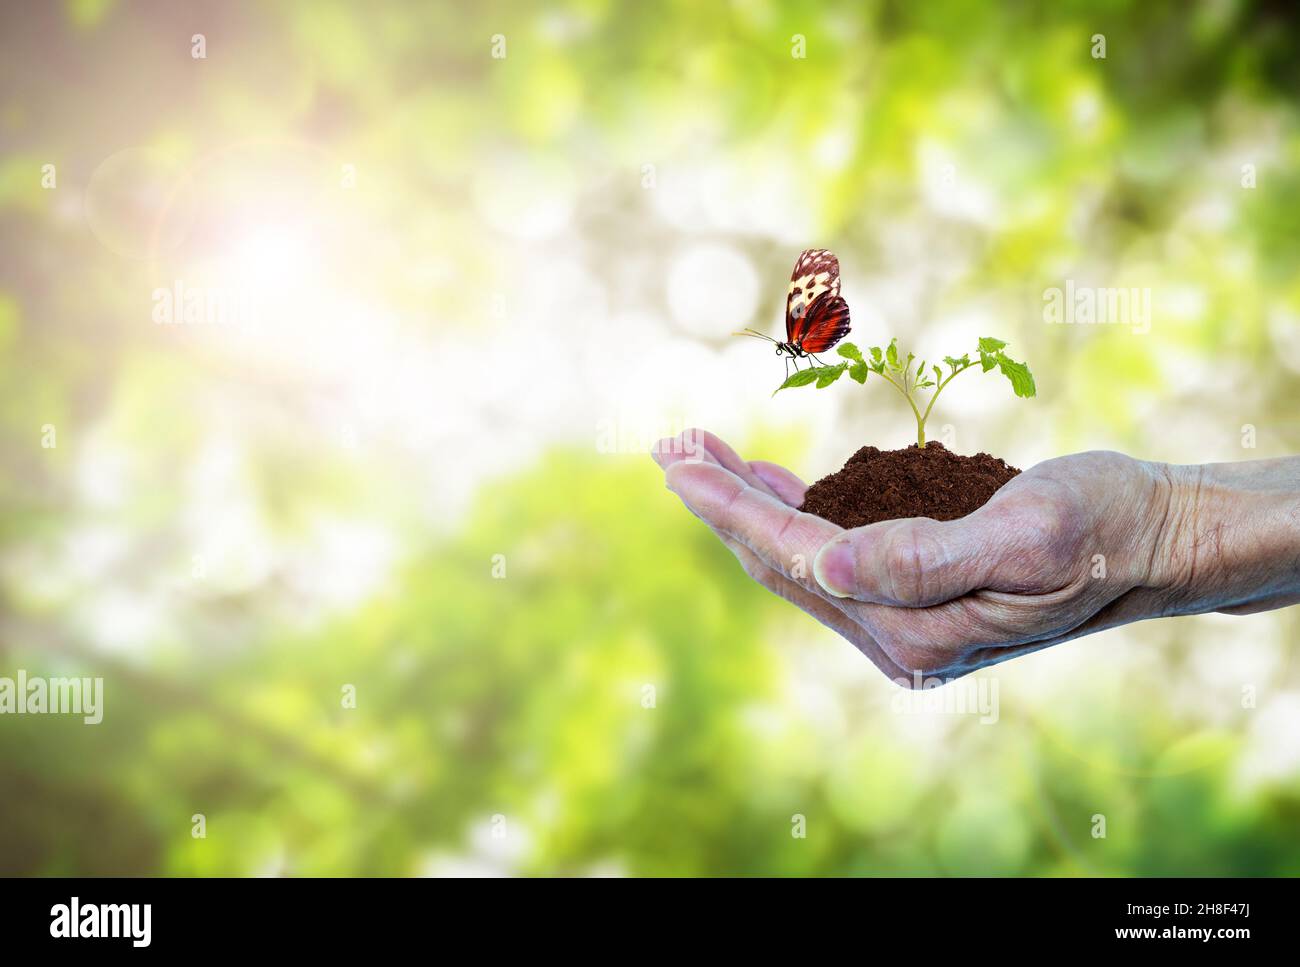 Earth Day or forest conservation concept showing hand of an elderly senior holding a growing tree sprout seedling with butterfly. Green environment na Stock Photo